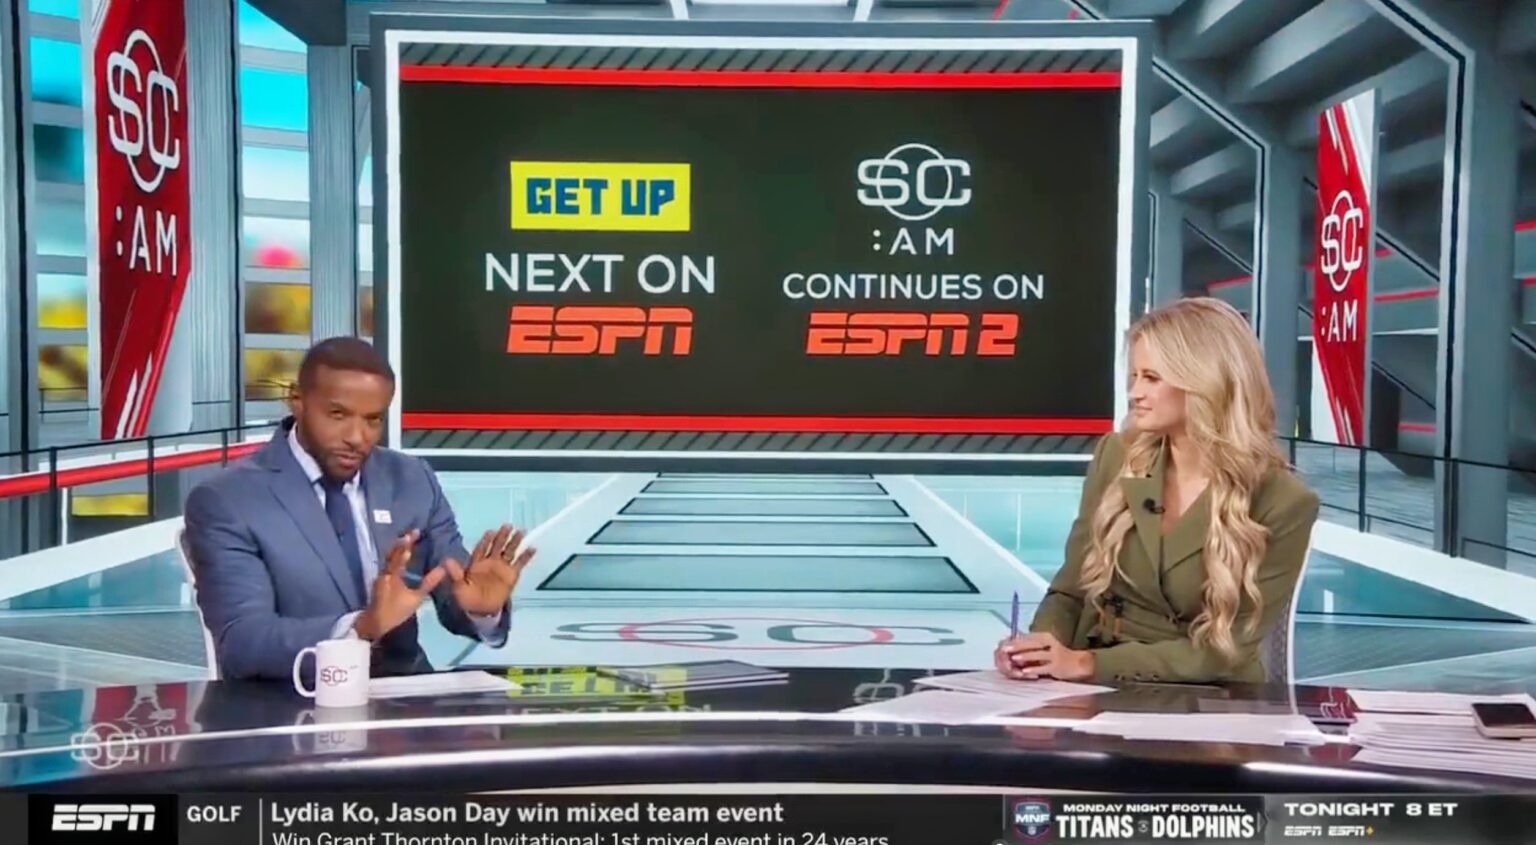 WATCH: ESPN Apologizes to Viewers After Accidentally Airing NSFW Video About Cowboys-Eagles Game on Live TV